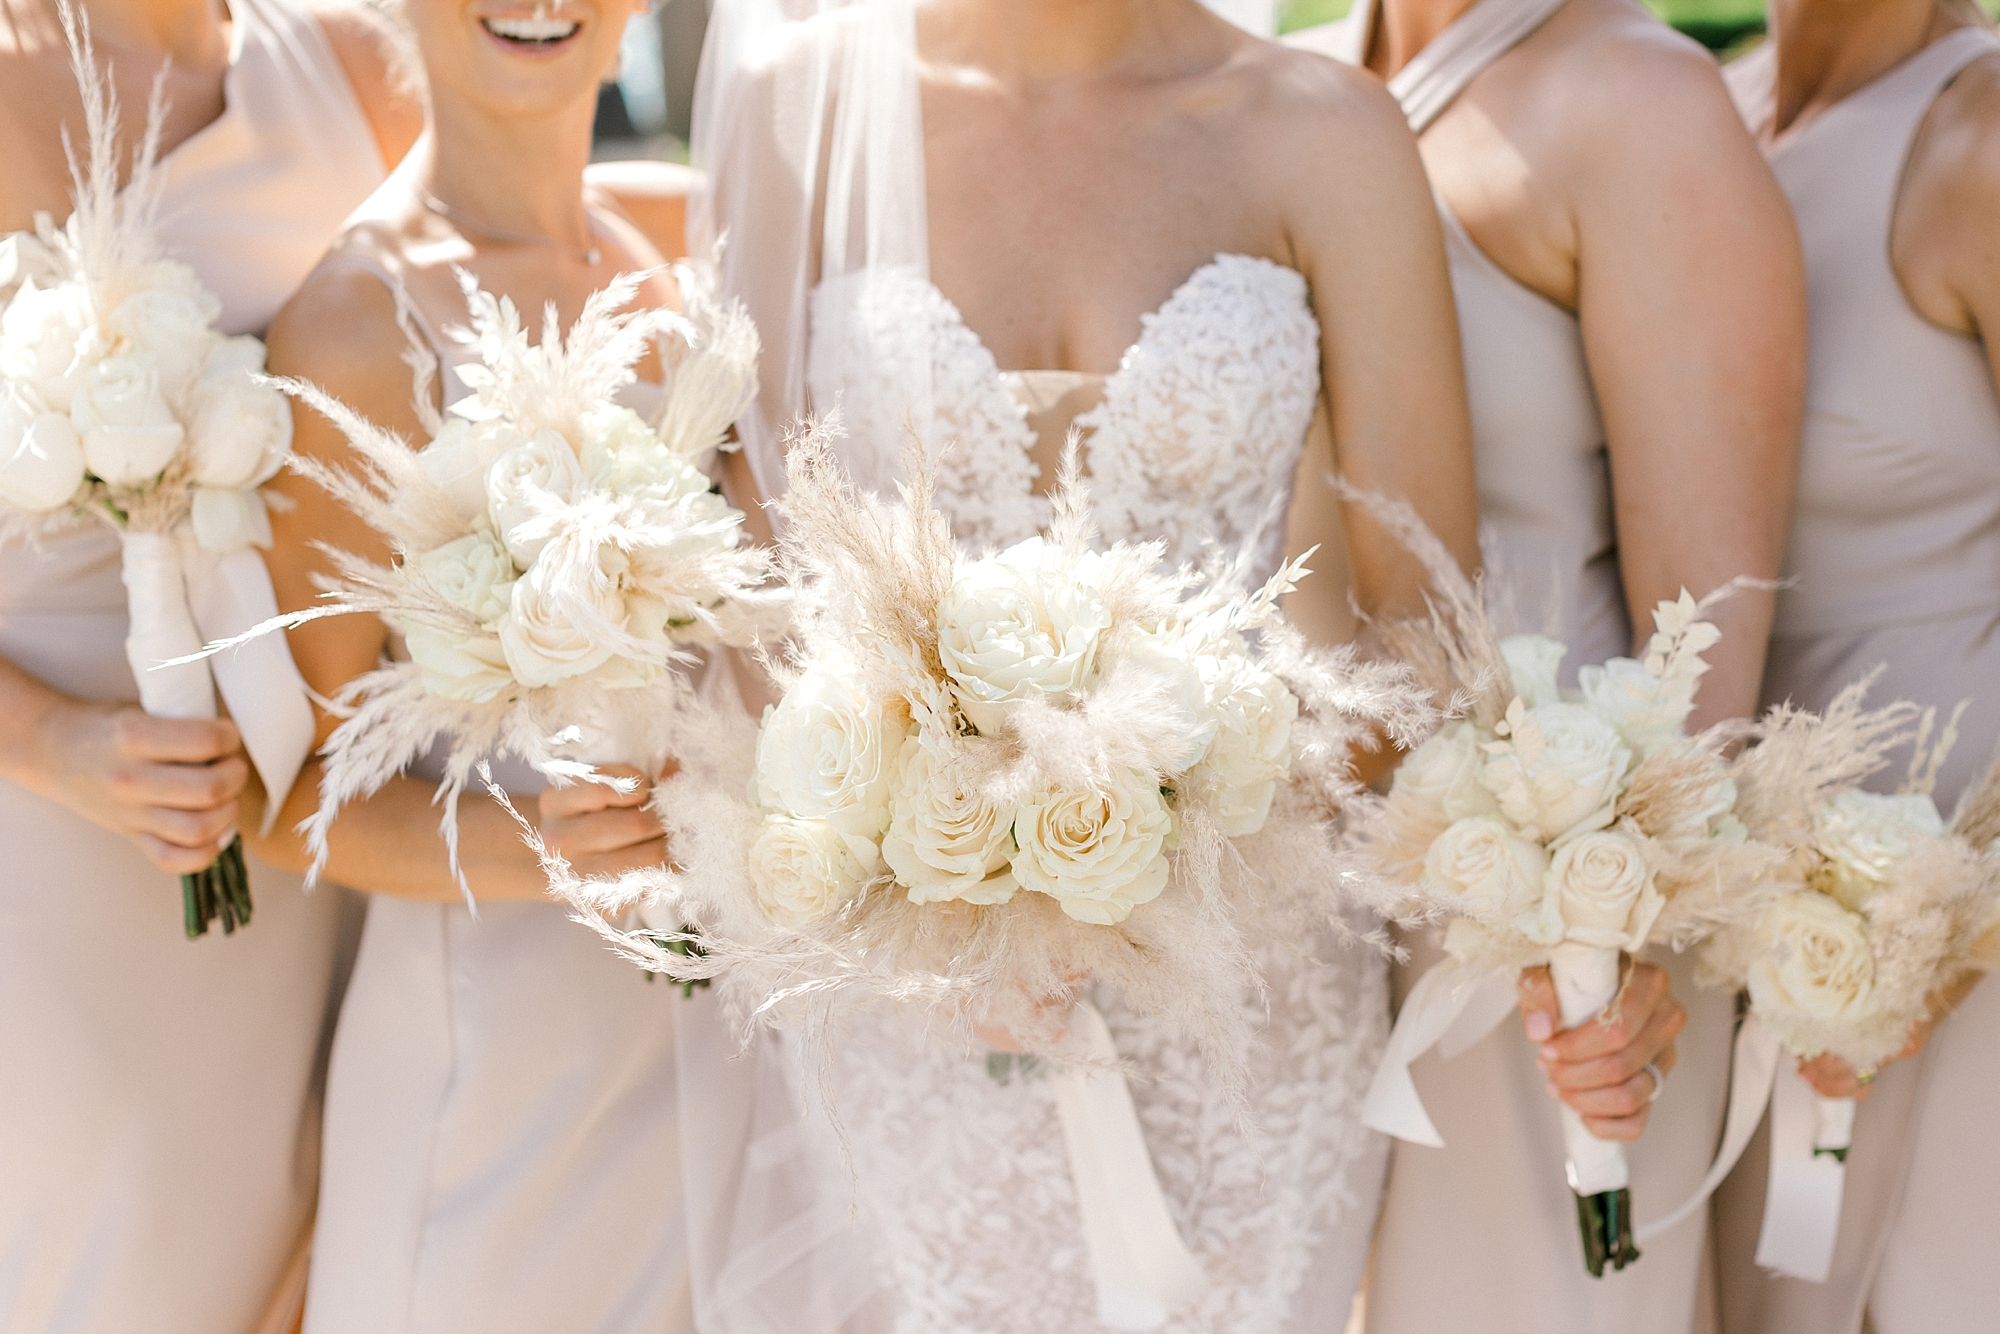 bride and bridesmaids stand together at the Renaissance Aruba holding ivory and tan flowers